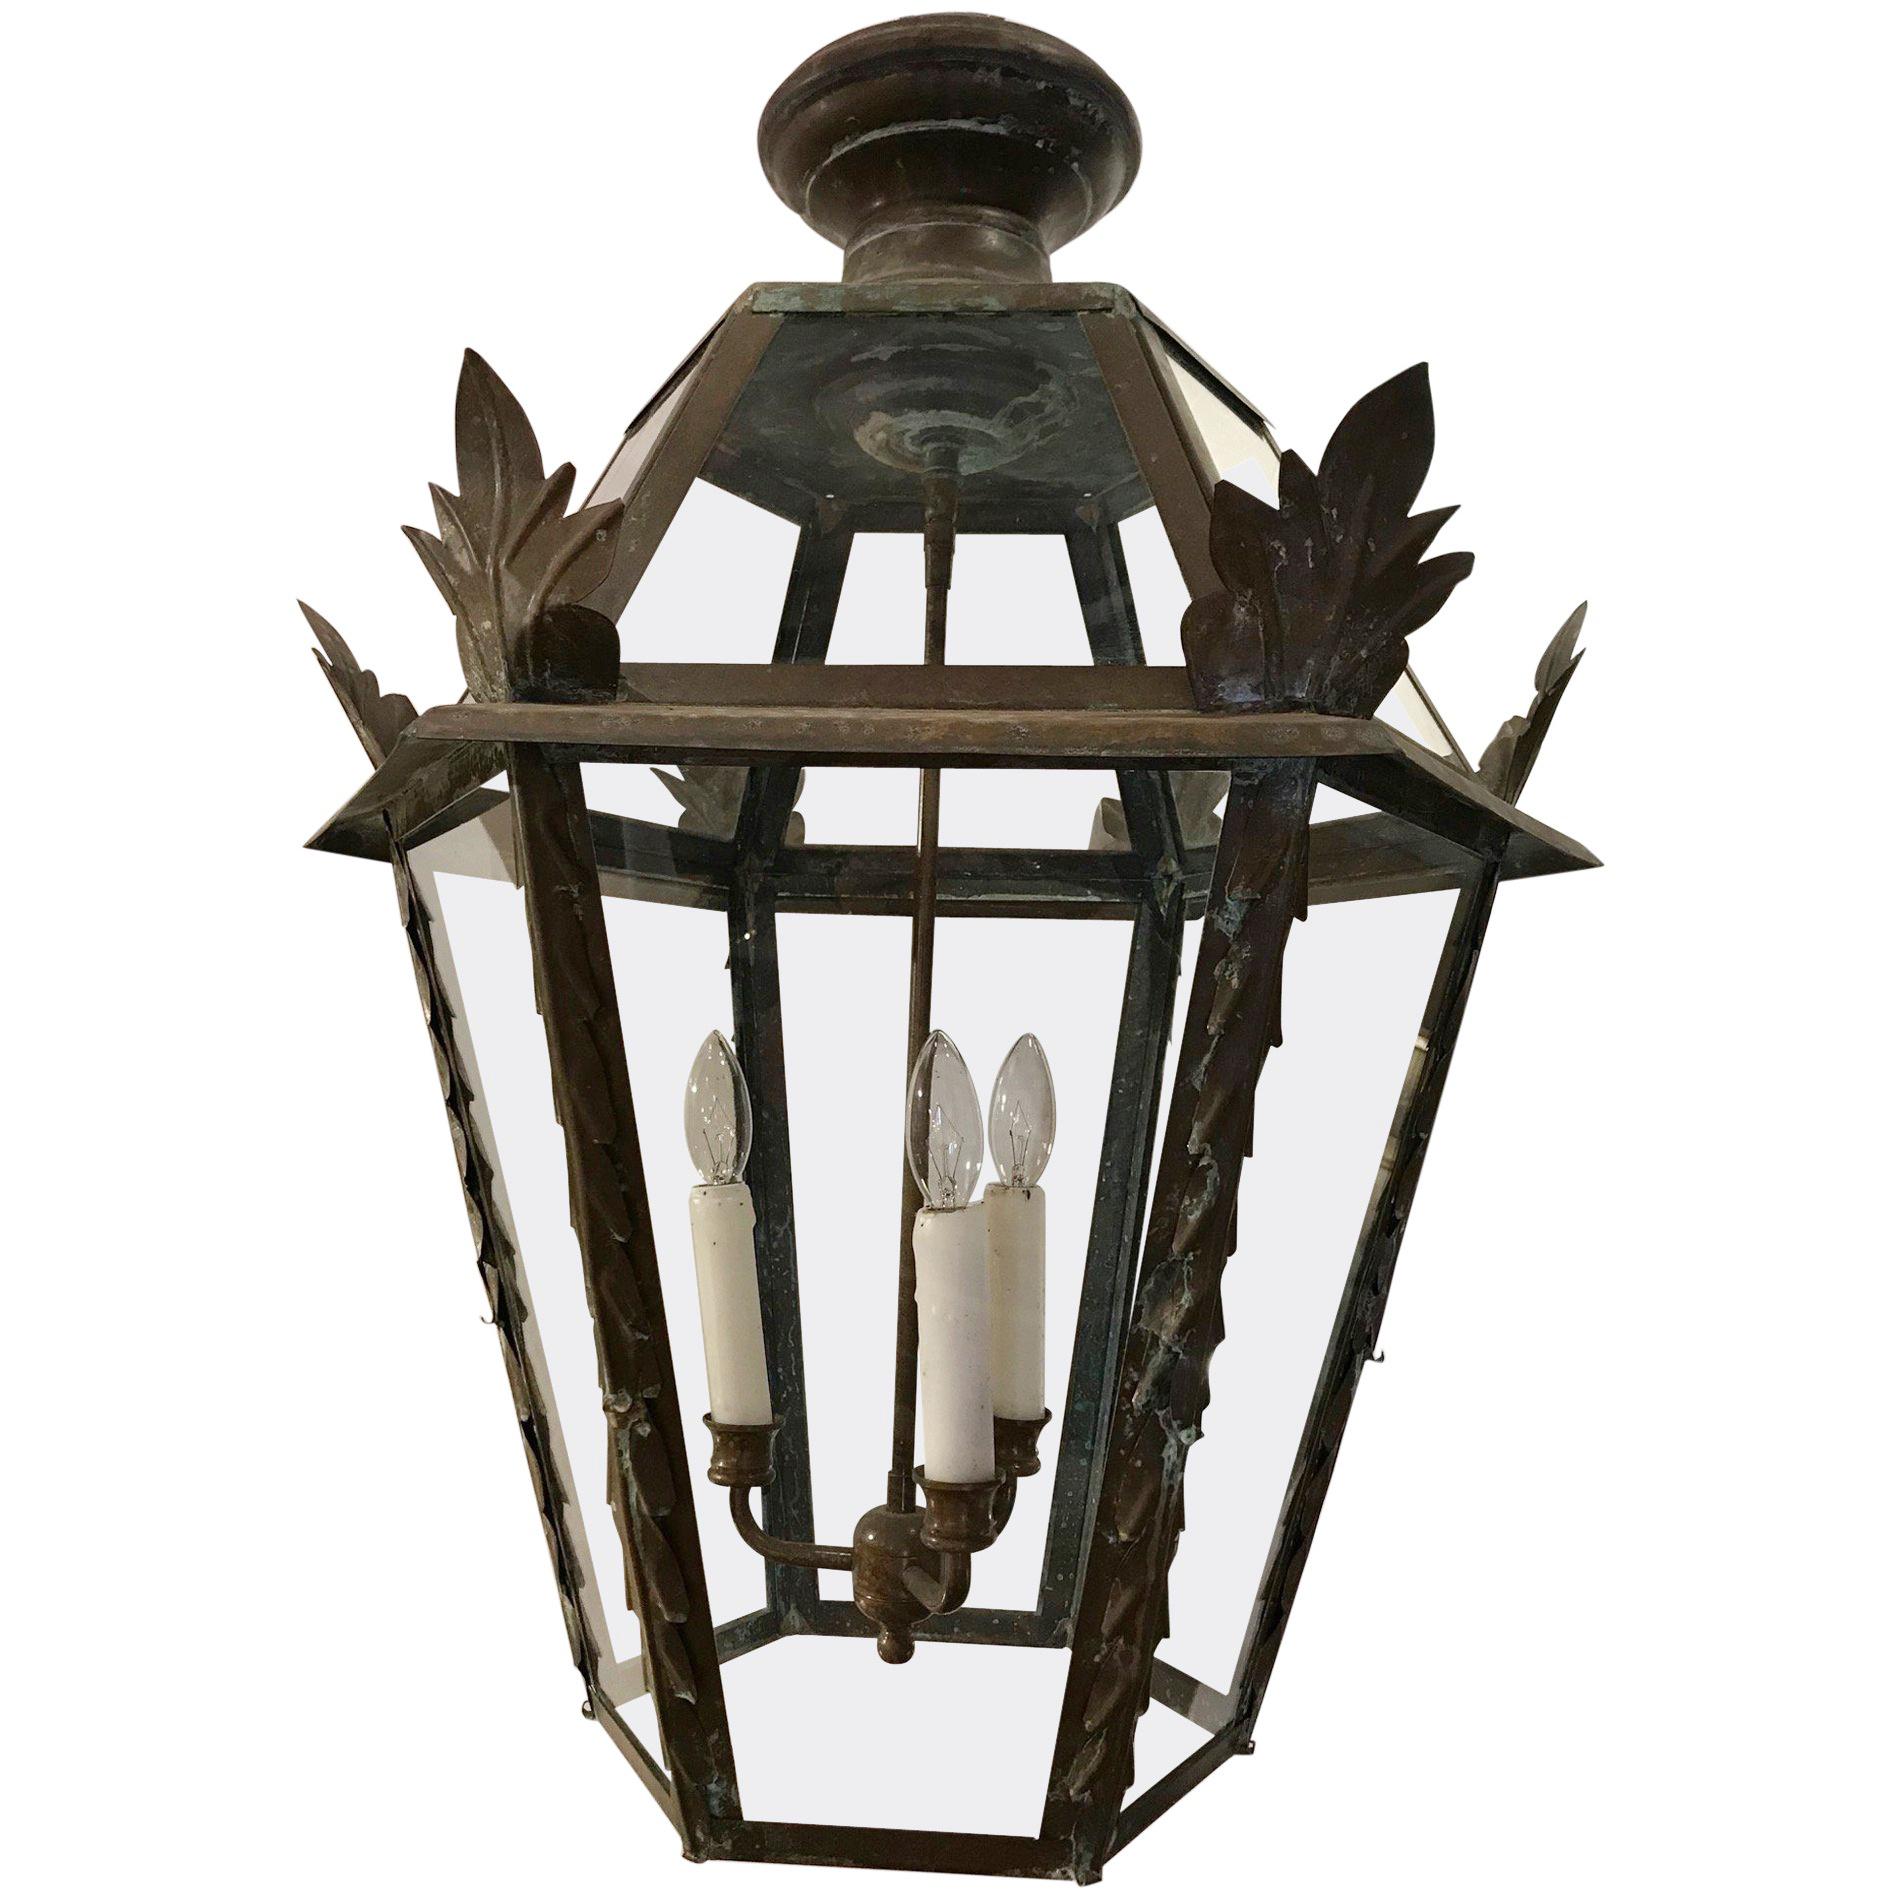 Very Special Antique French Copper Lantern